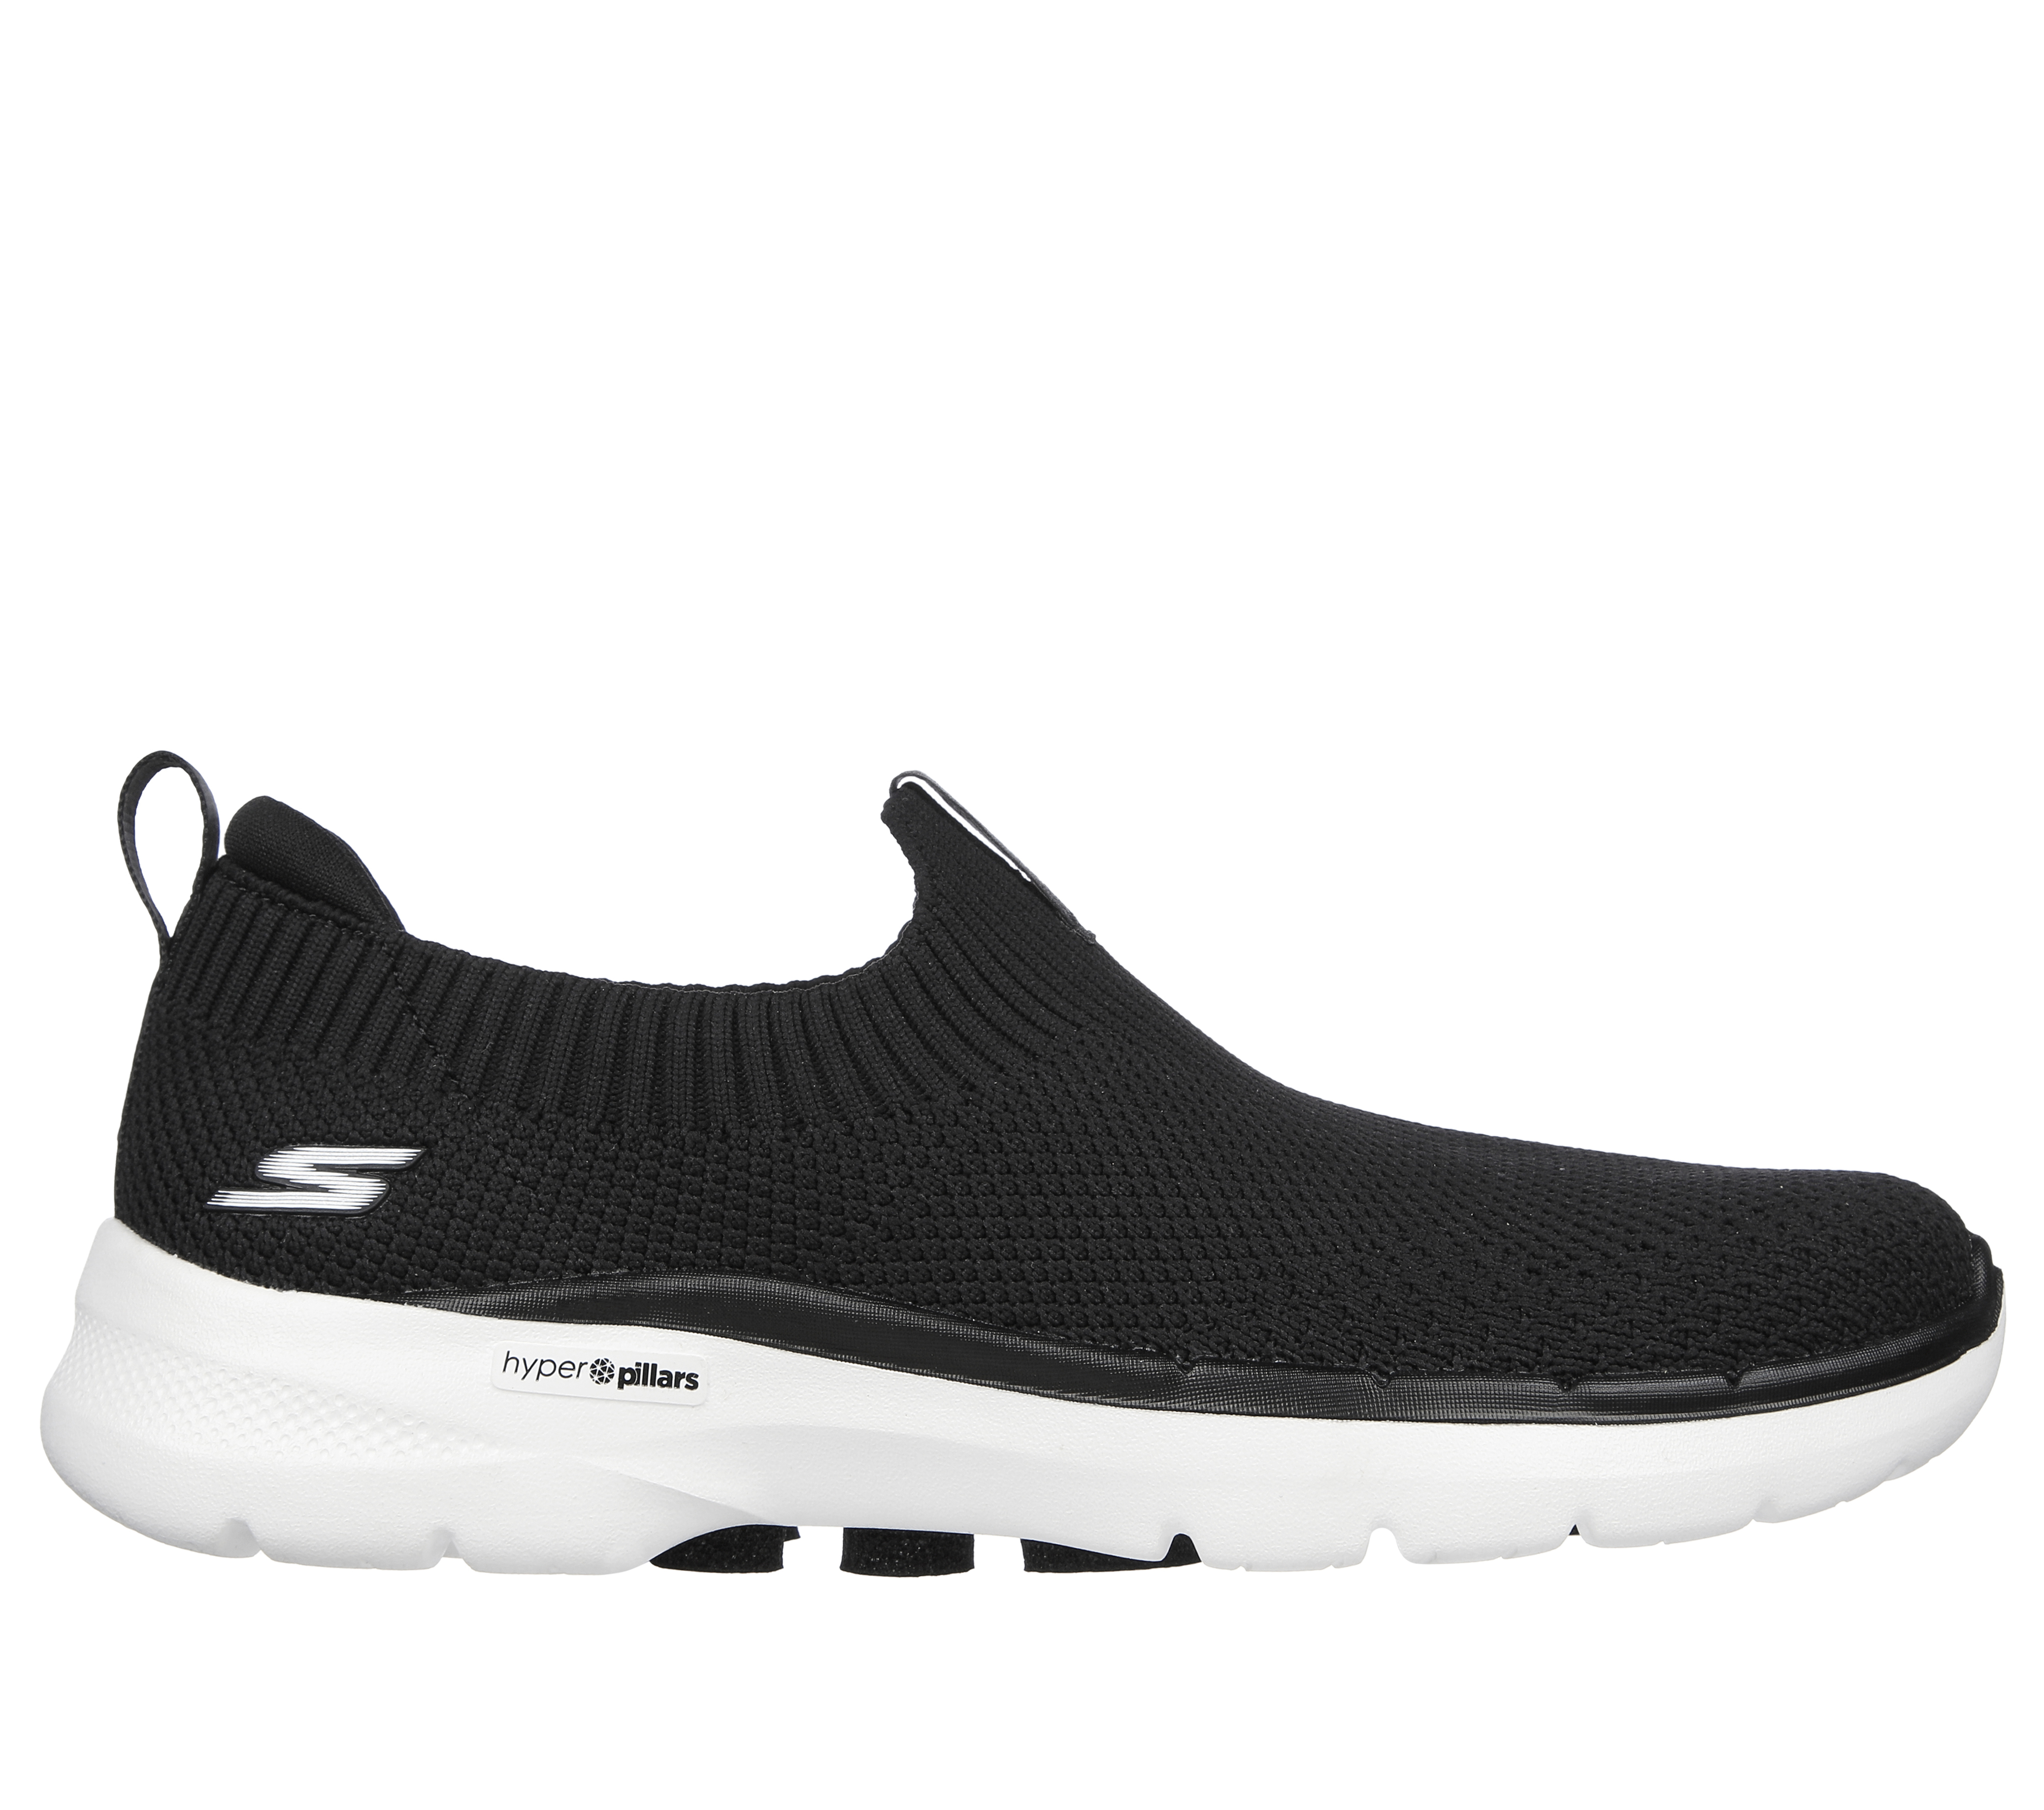 What is Skechers Air Cooled Goga Mat?